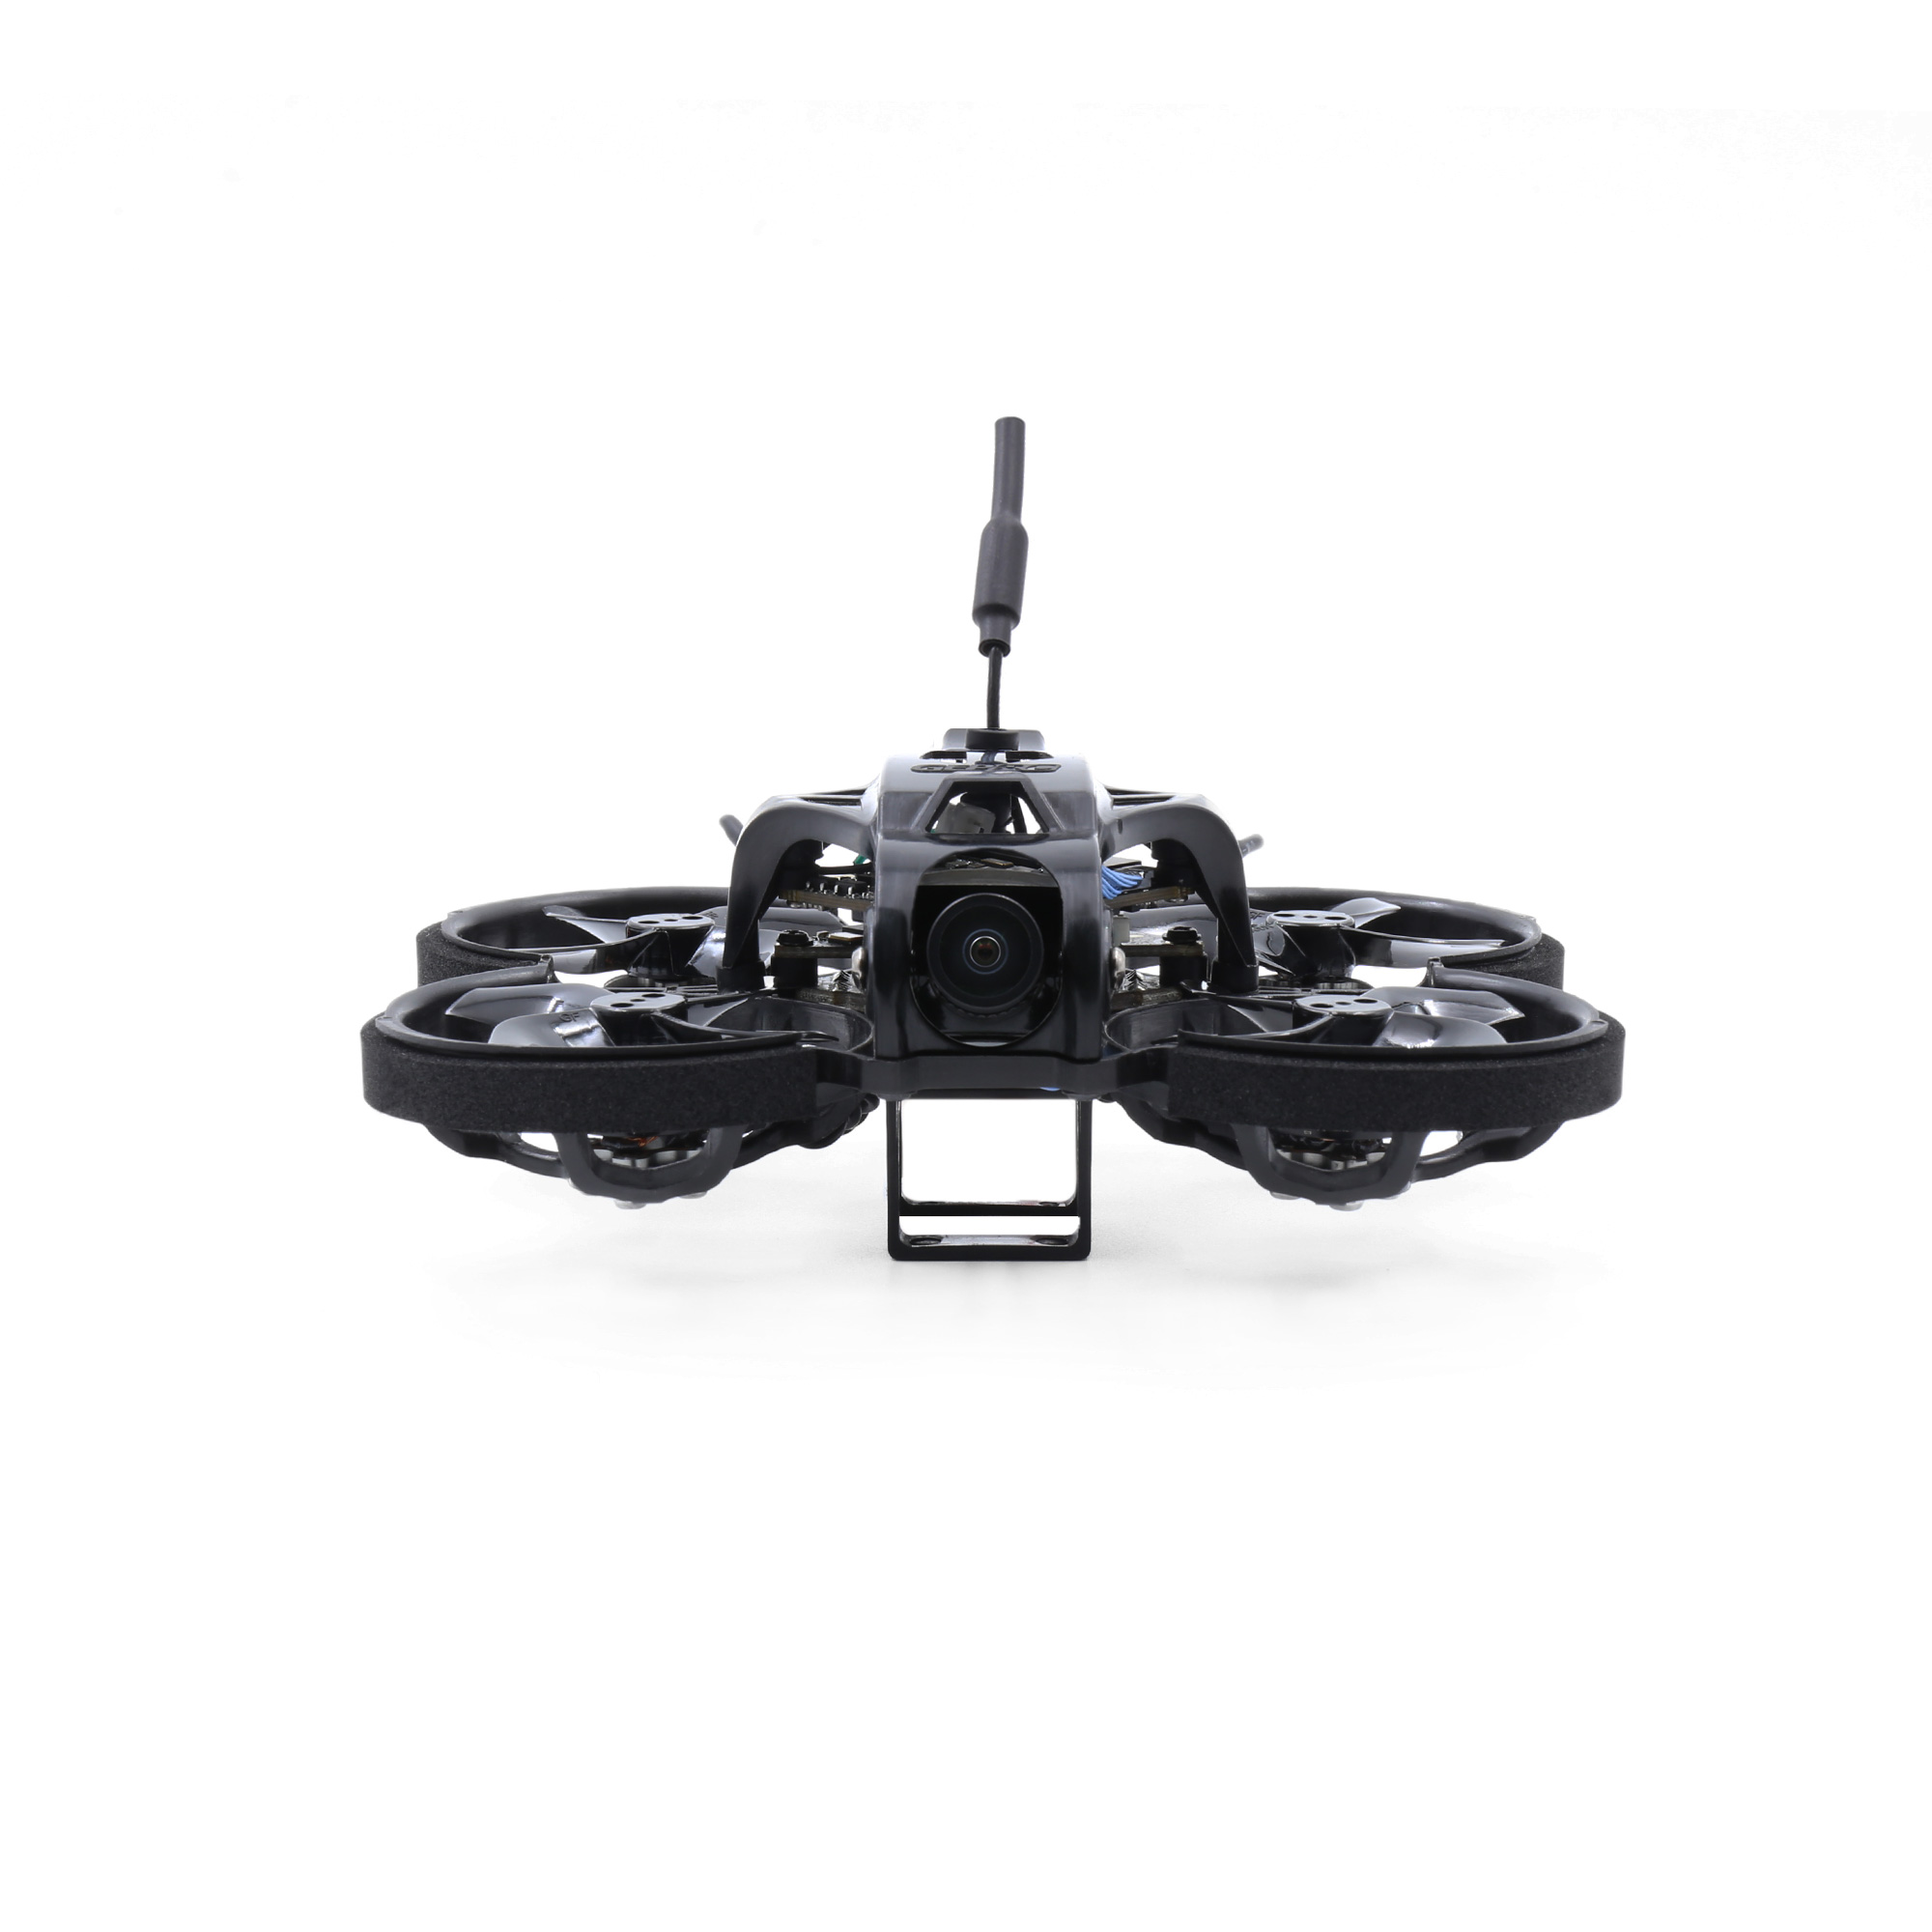 GEPRC TinyGO 1.6inch 2S 4K Caddx Loris FPV Indoor Whoop+GR8 Remote Controller+RG1 Goggles RTF Ready To Fly FPV Racing RC Drone - Photo: 6